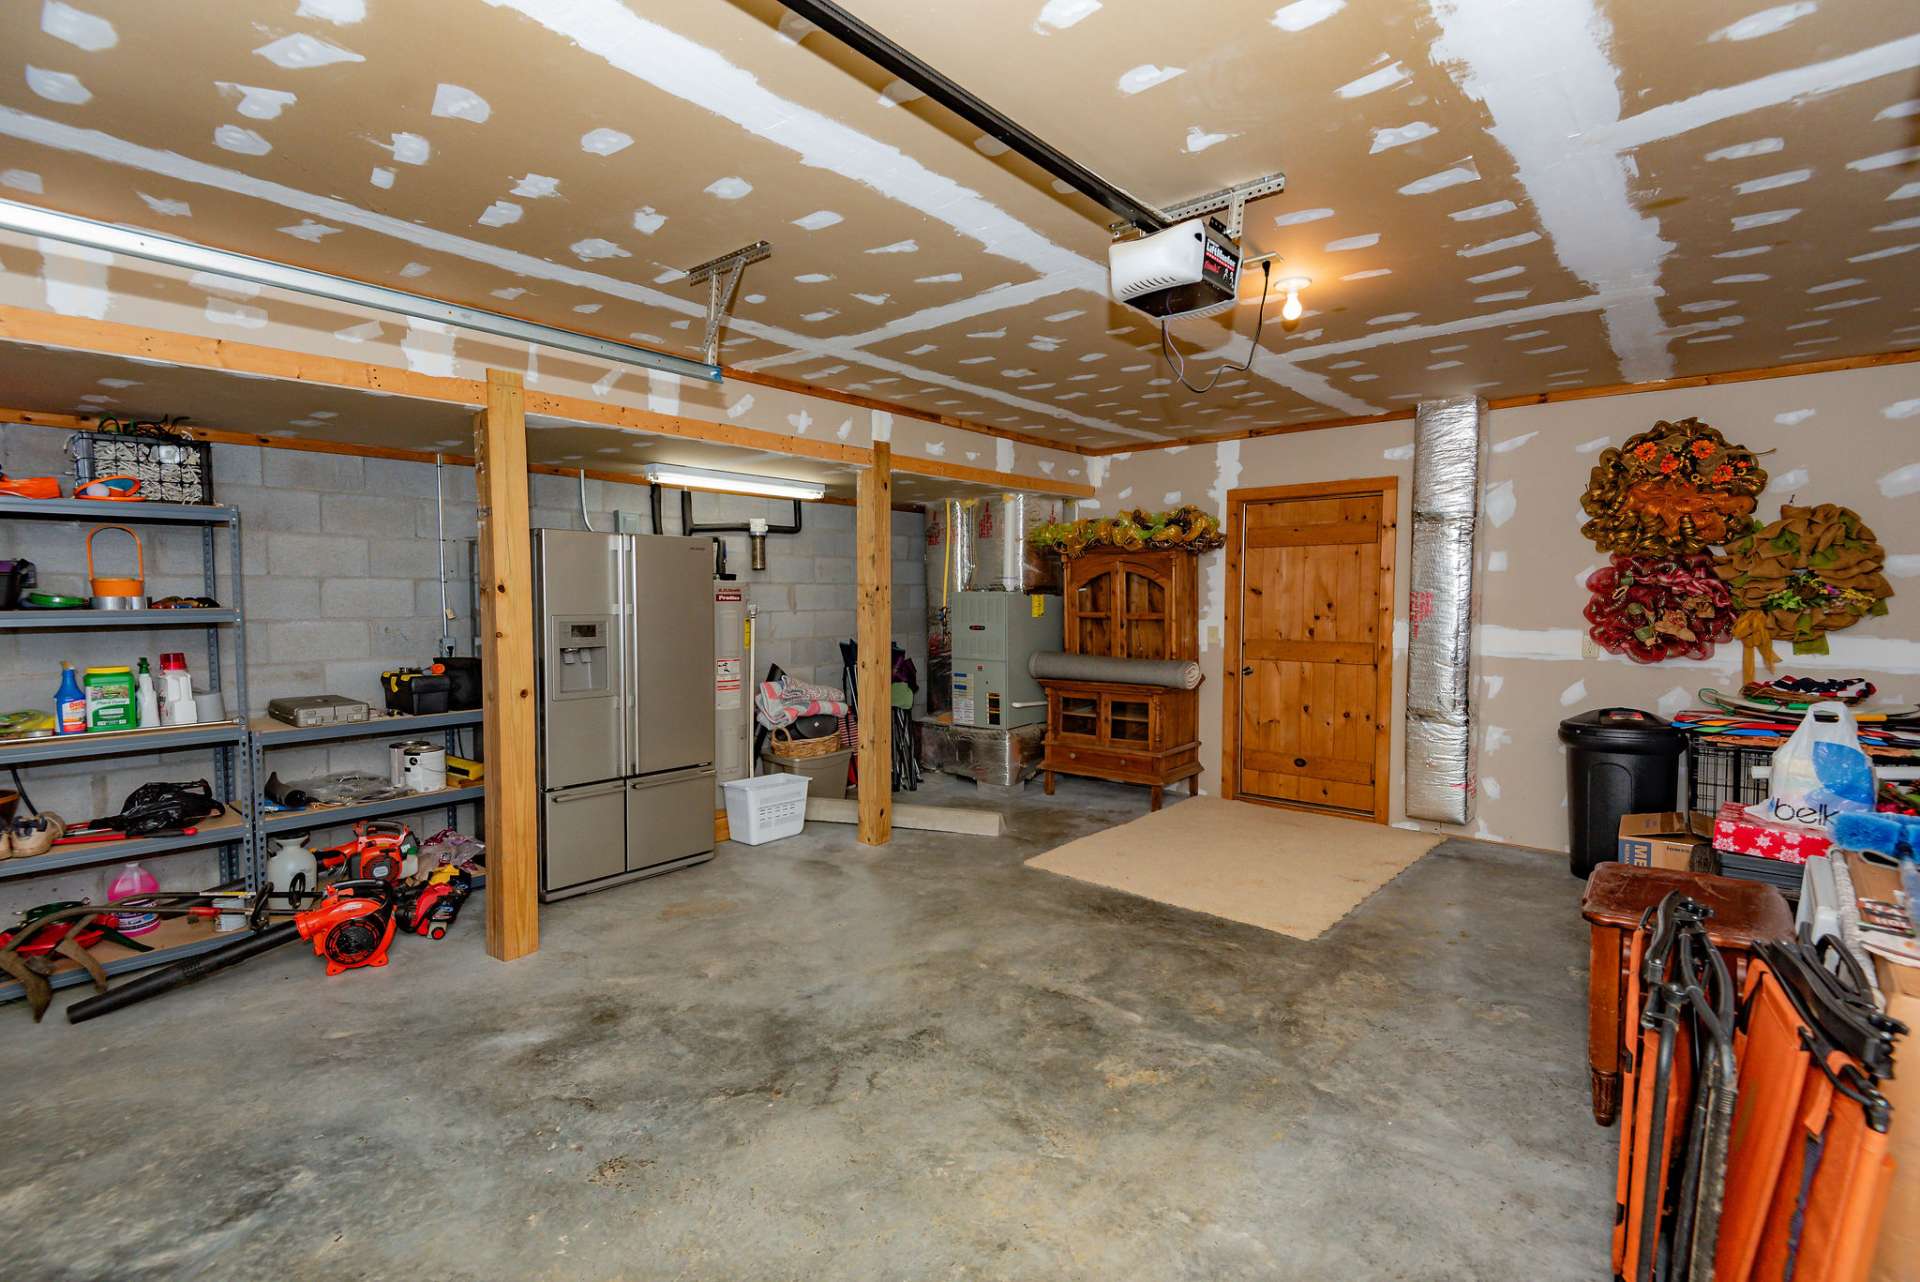 Convenient access to oversized one car garage offering abundant storage space is also on the lower level.